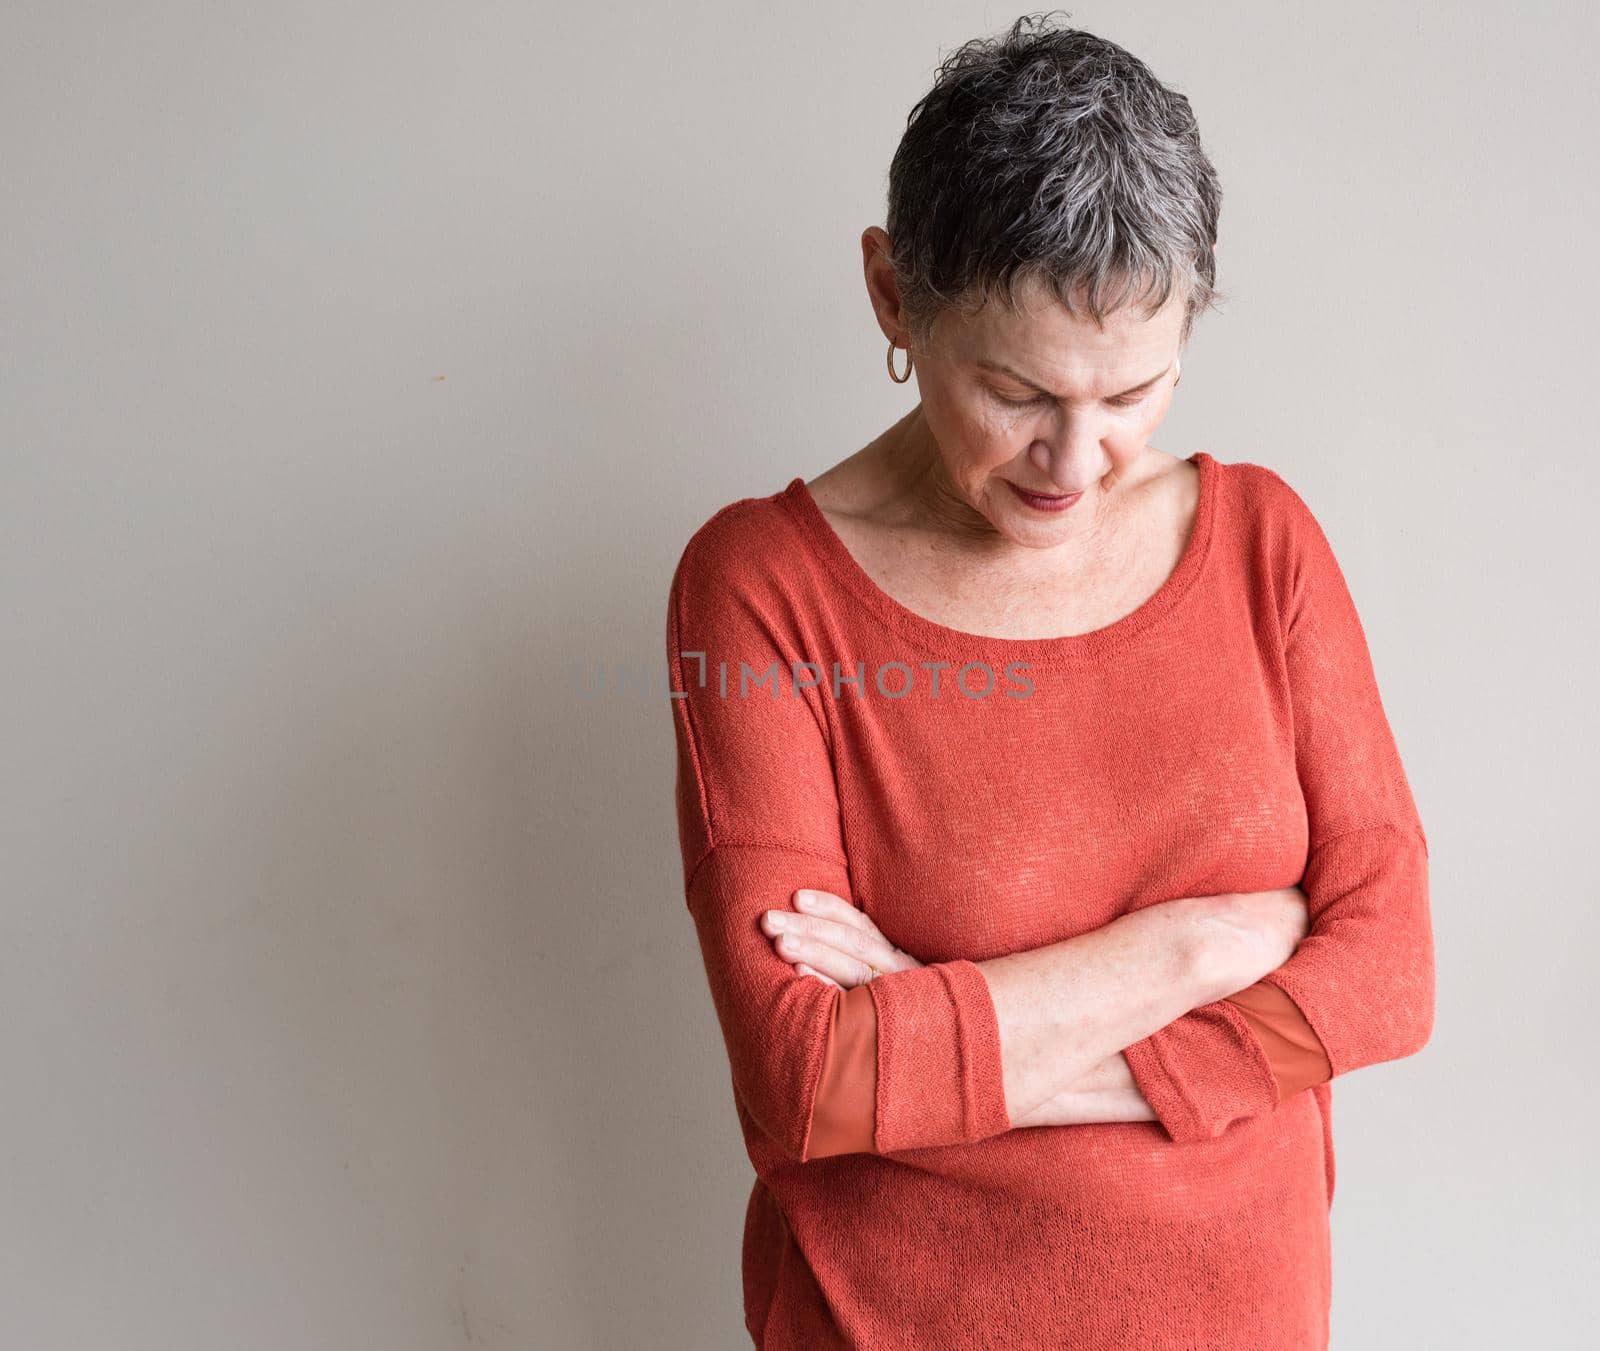 Older woman with short grey hair and orange top looking down pensively with arms crossed by natalie_board